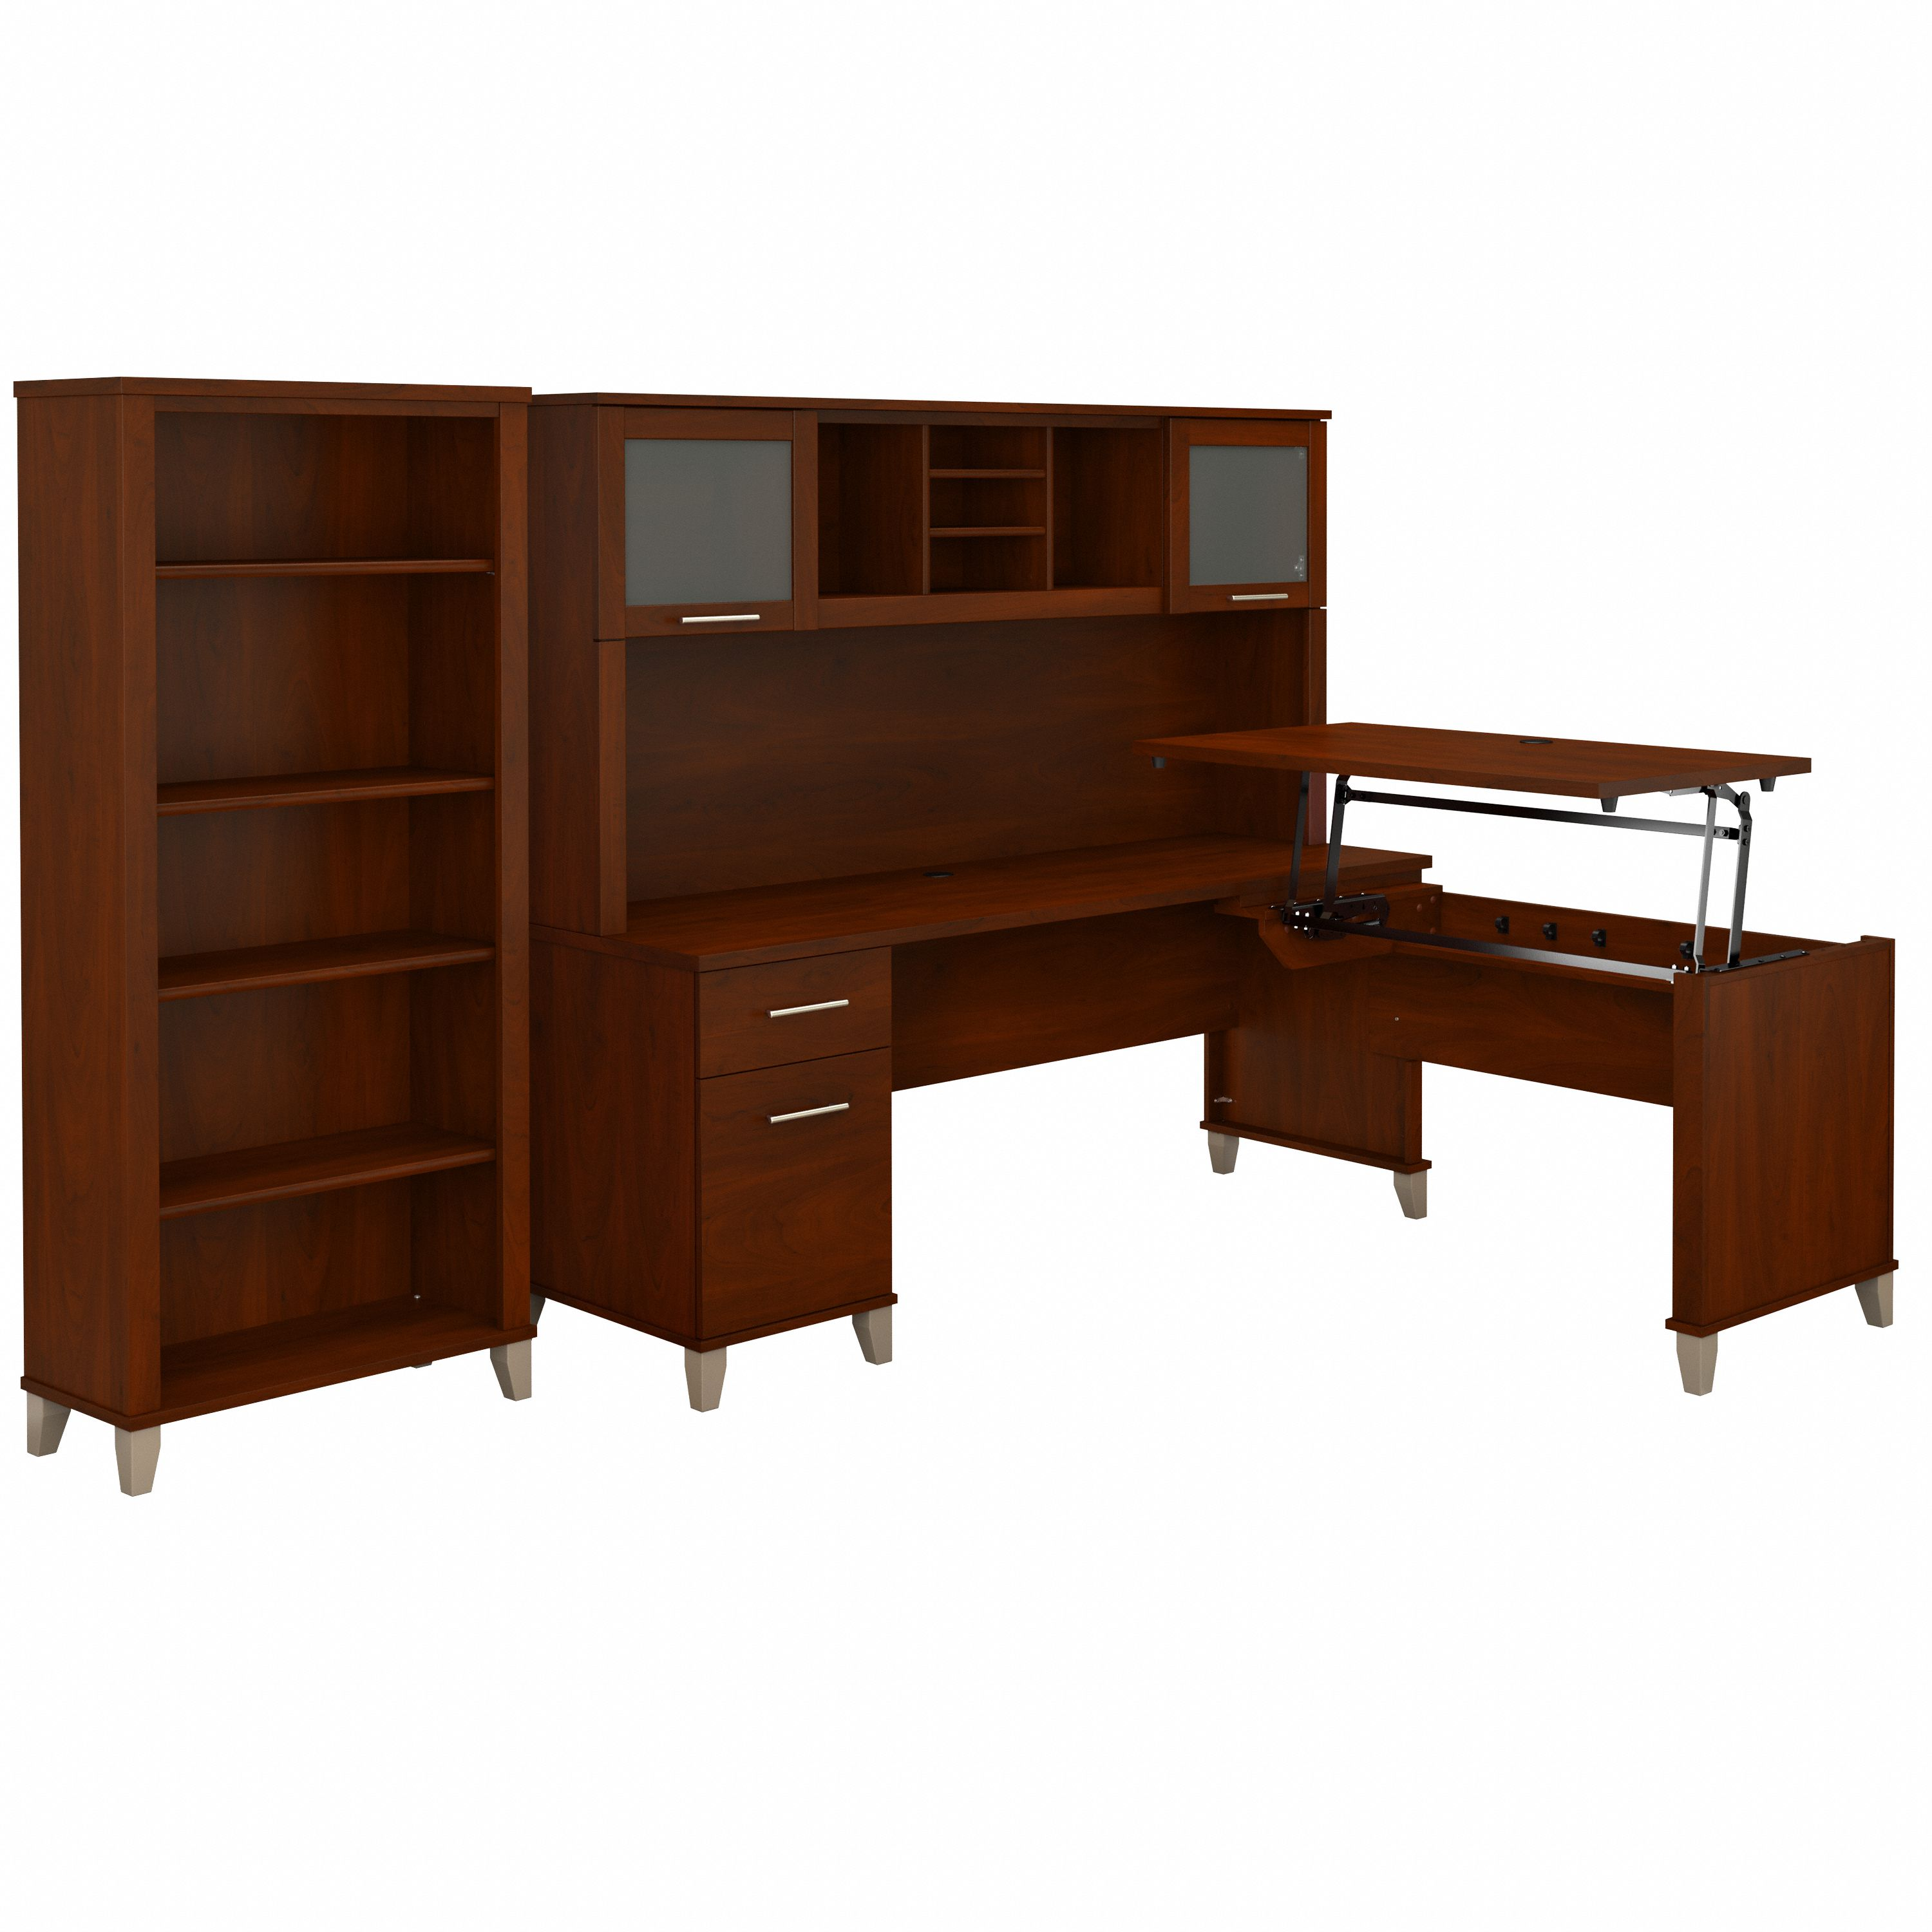 Shop Bush Furniture Somerset 72W 3 Position Sit to Stand L Shaped Desk with Hutch and Bookcase 02 SET017HC #color_hansen cherry